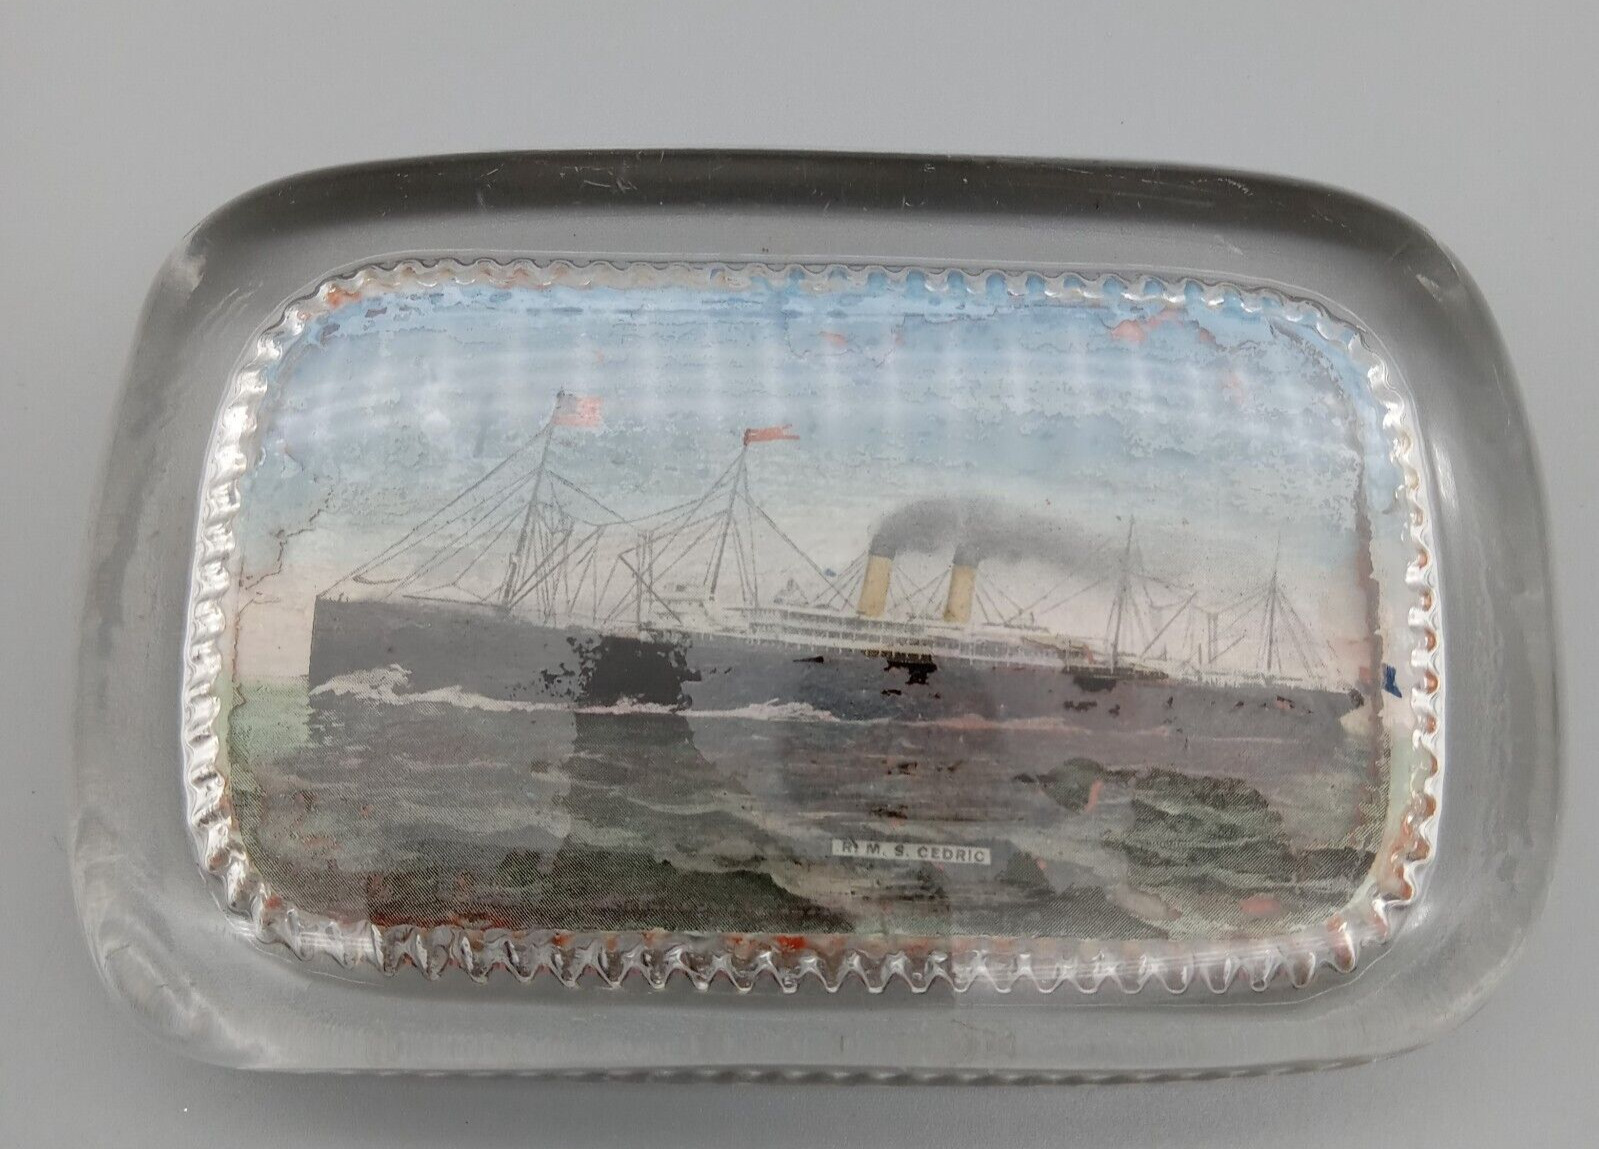 RMS CEDRIC White Star Line Souvenir Portrait Paperweight IMAGE SEPERATING DAMAGE